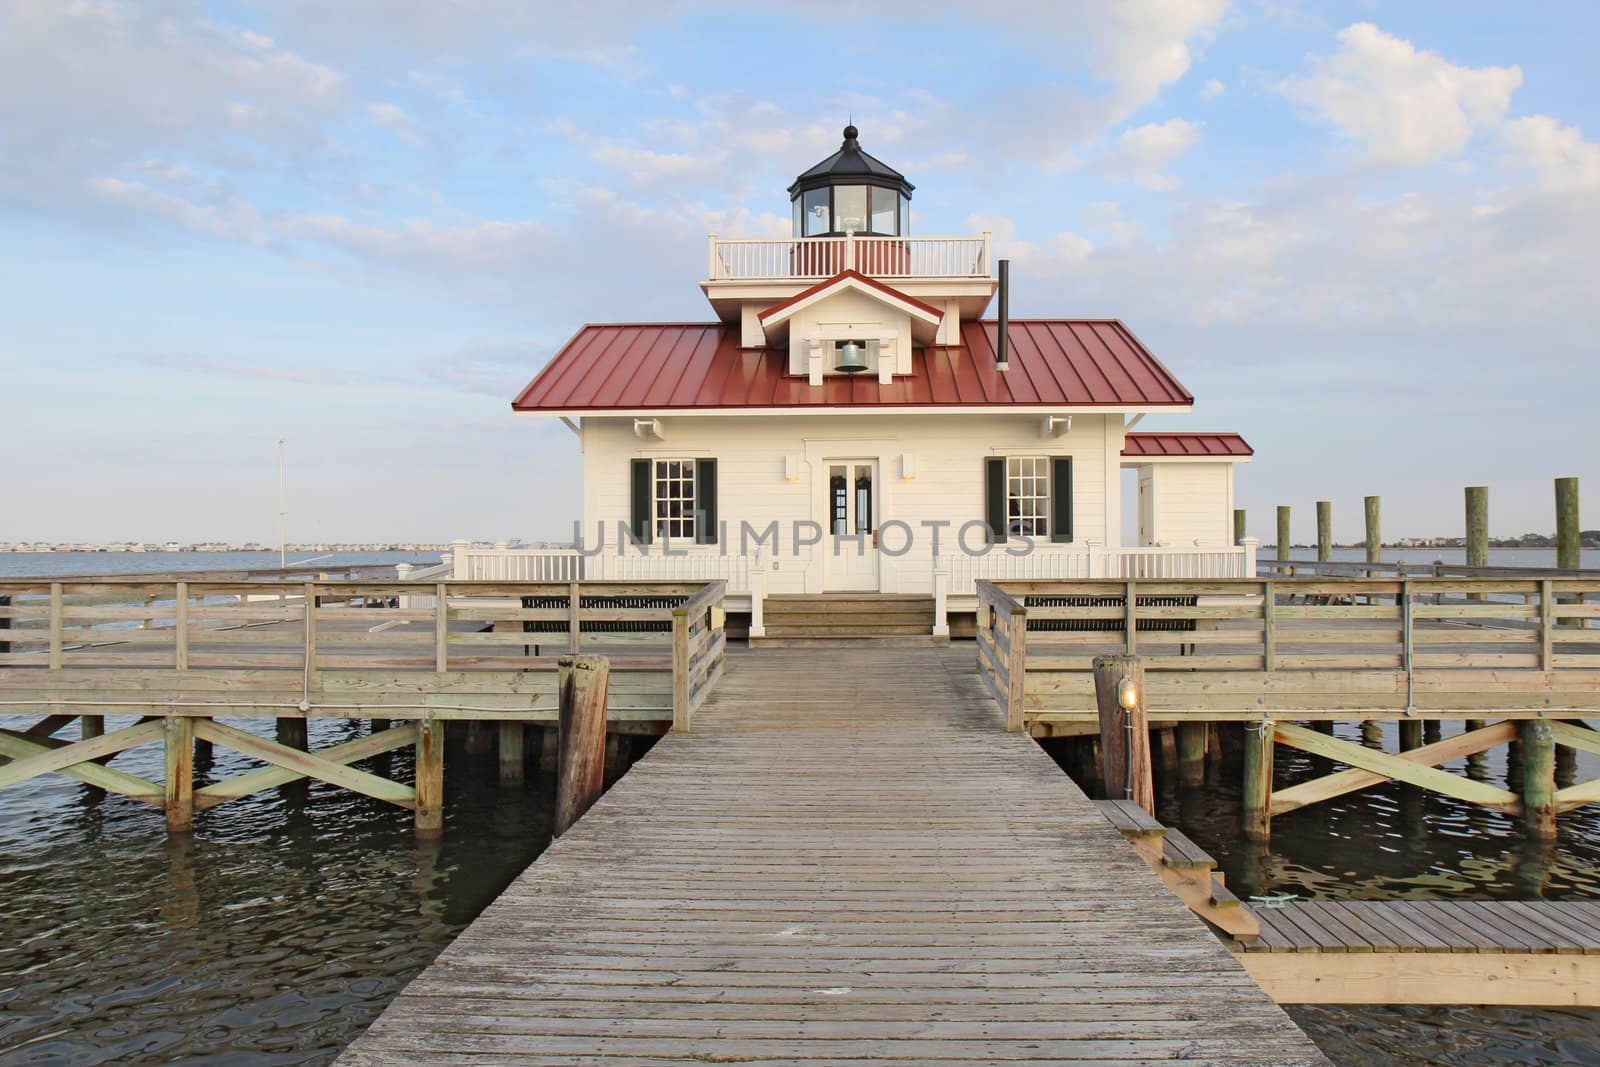 The Roanoke Marshes Lighthouse in Manteo, North Carolina by sgoodwin4813